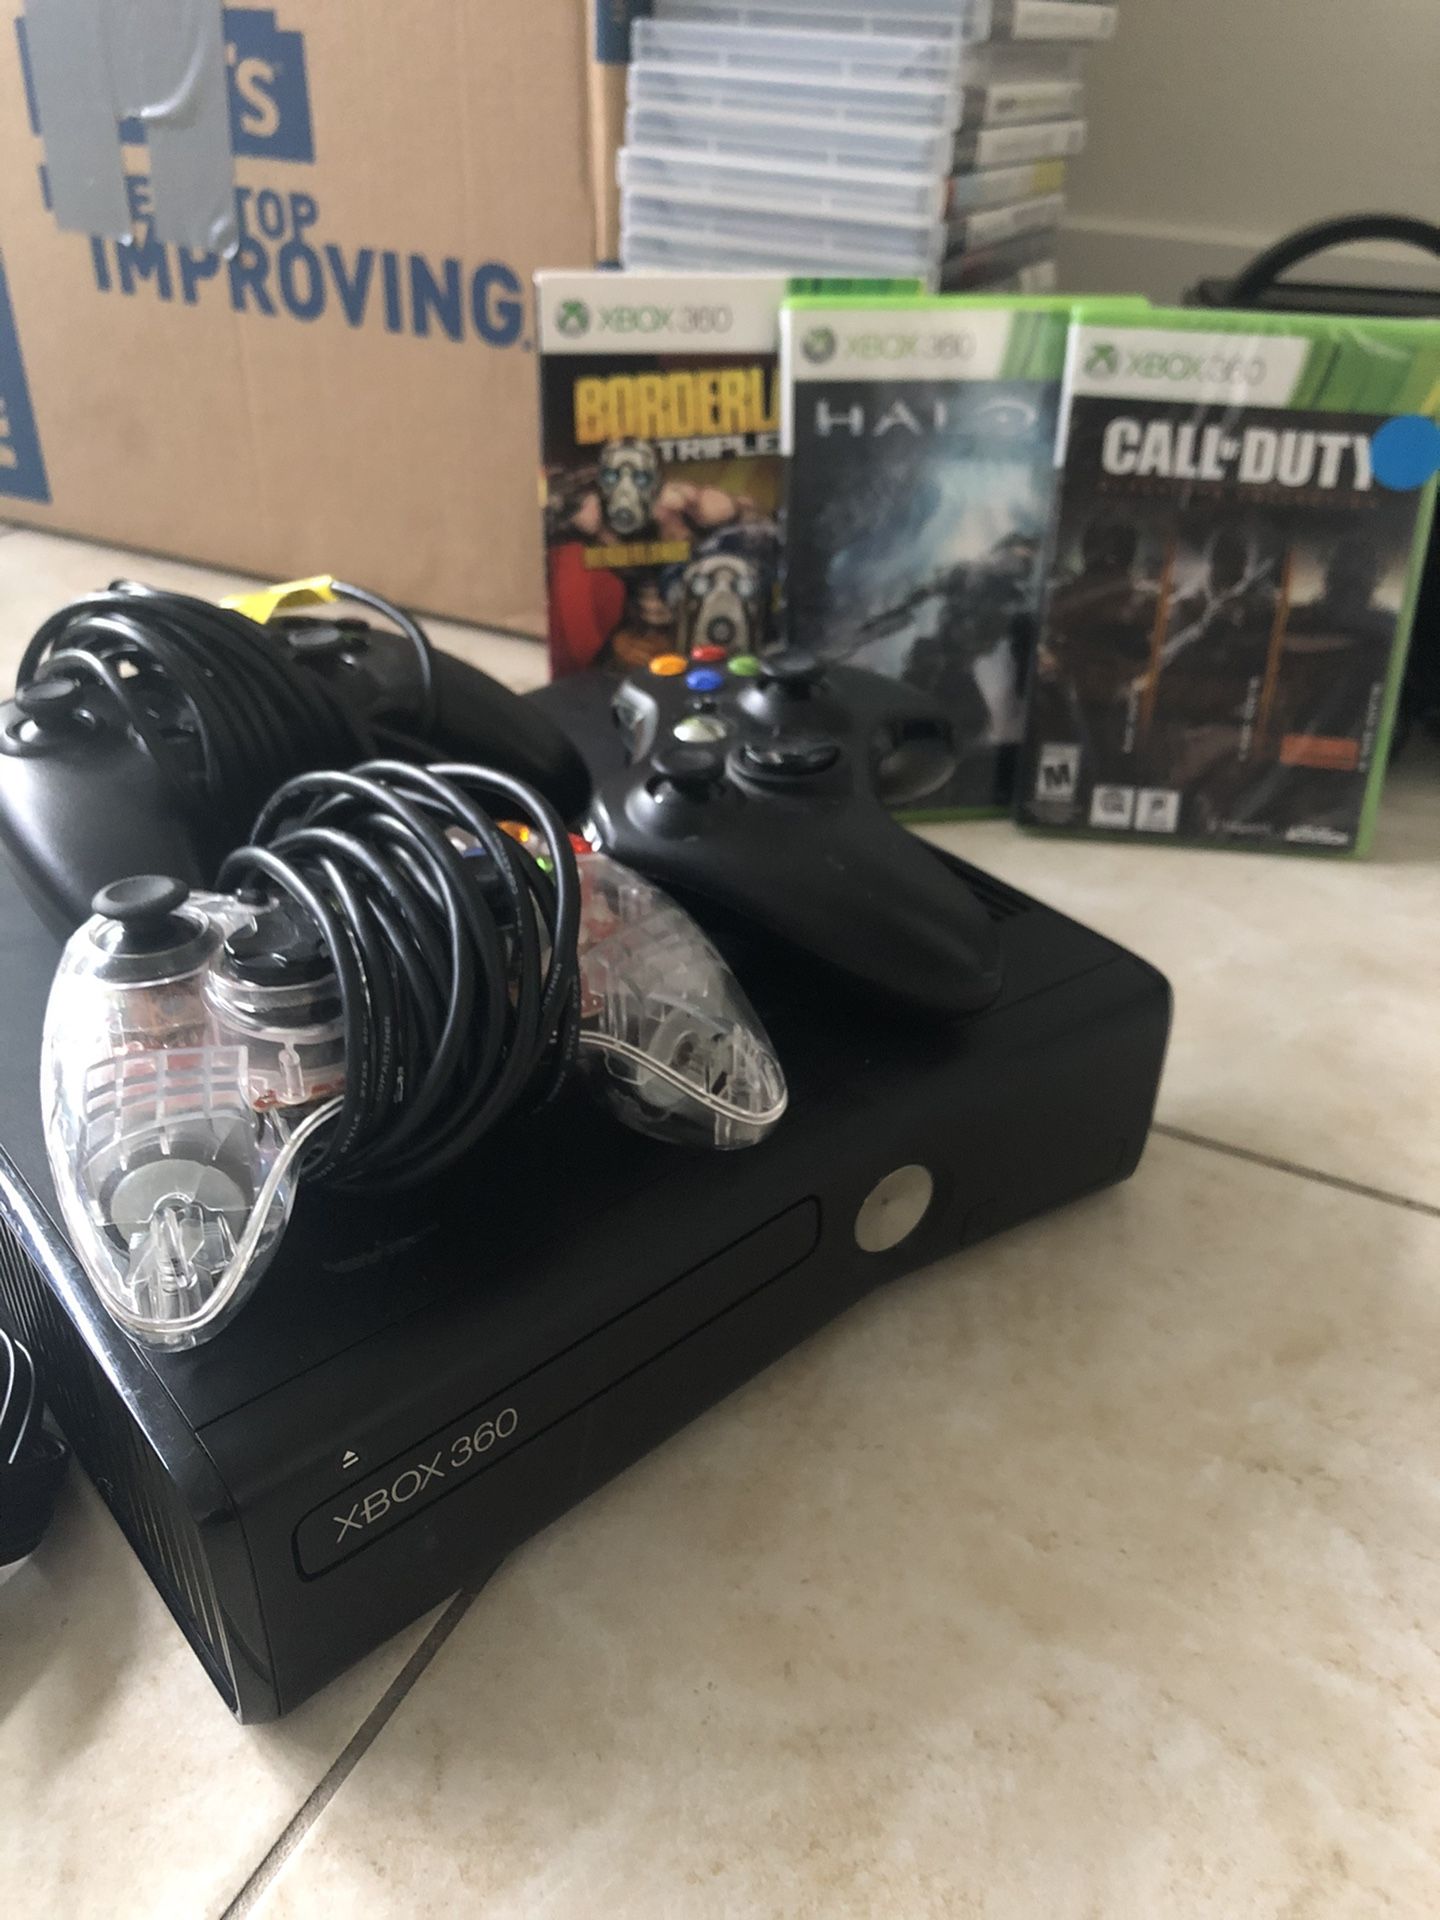 Xbox 360 w/ controllers